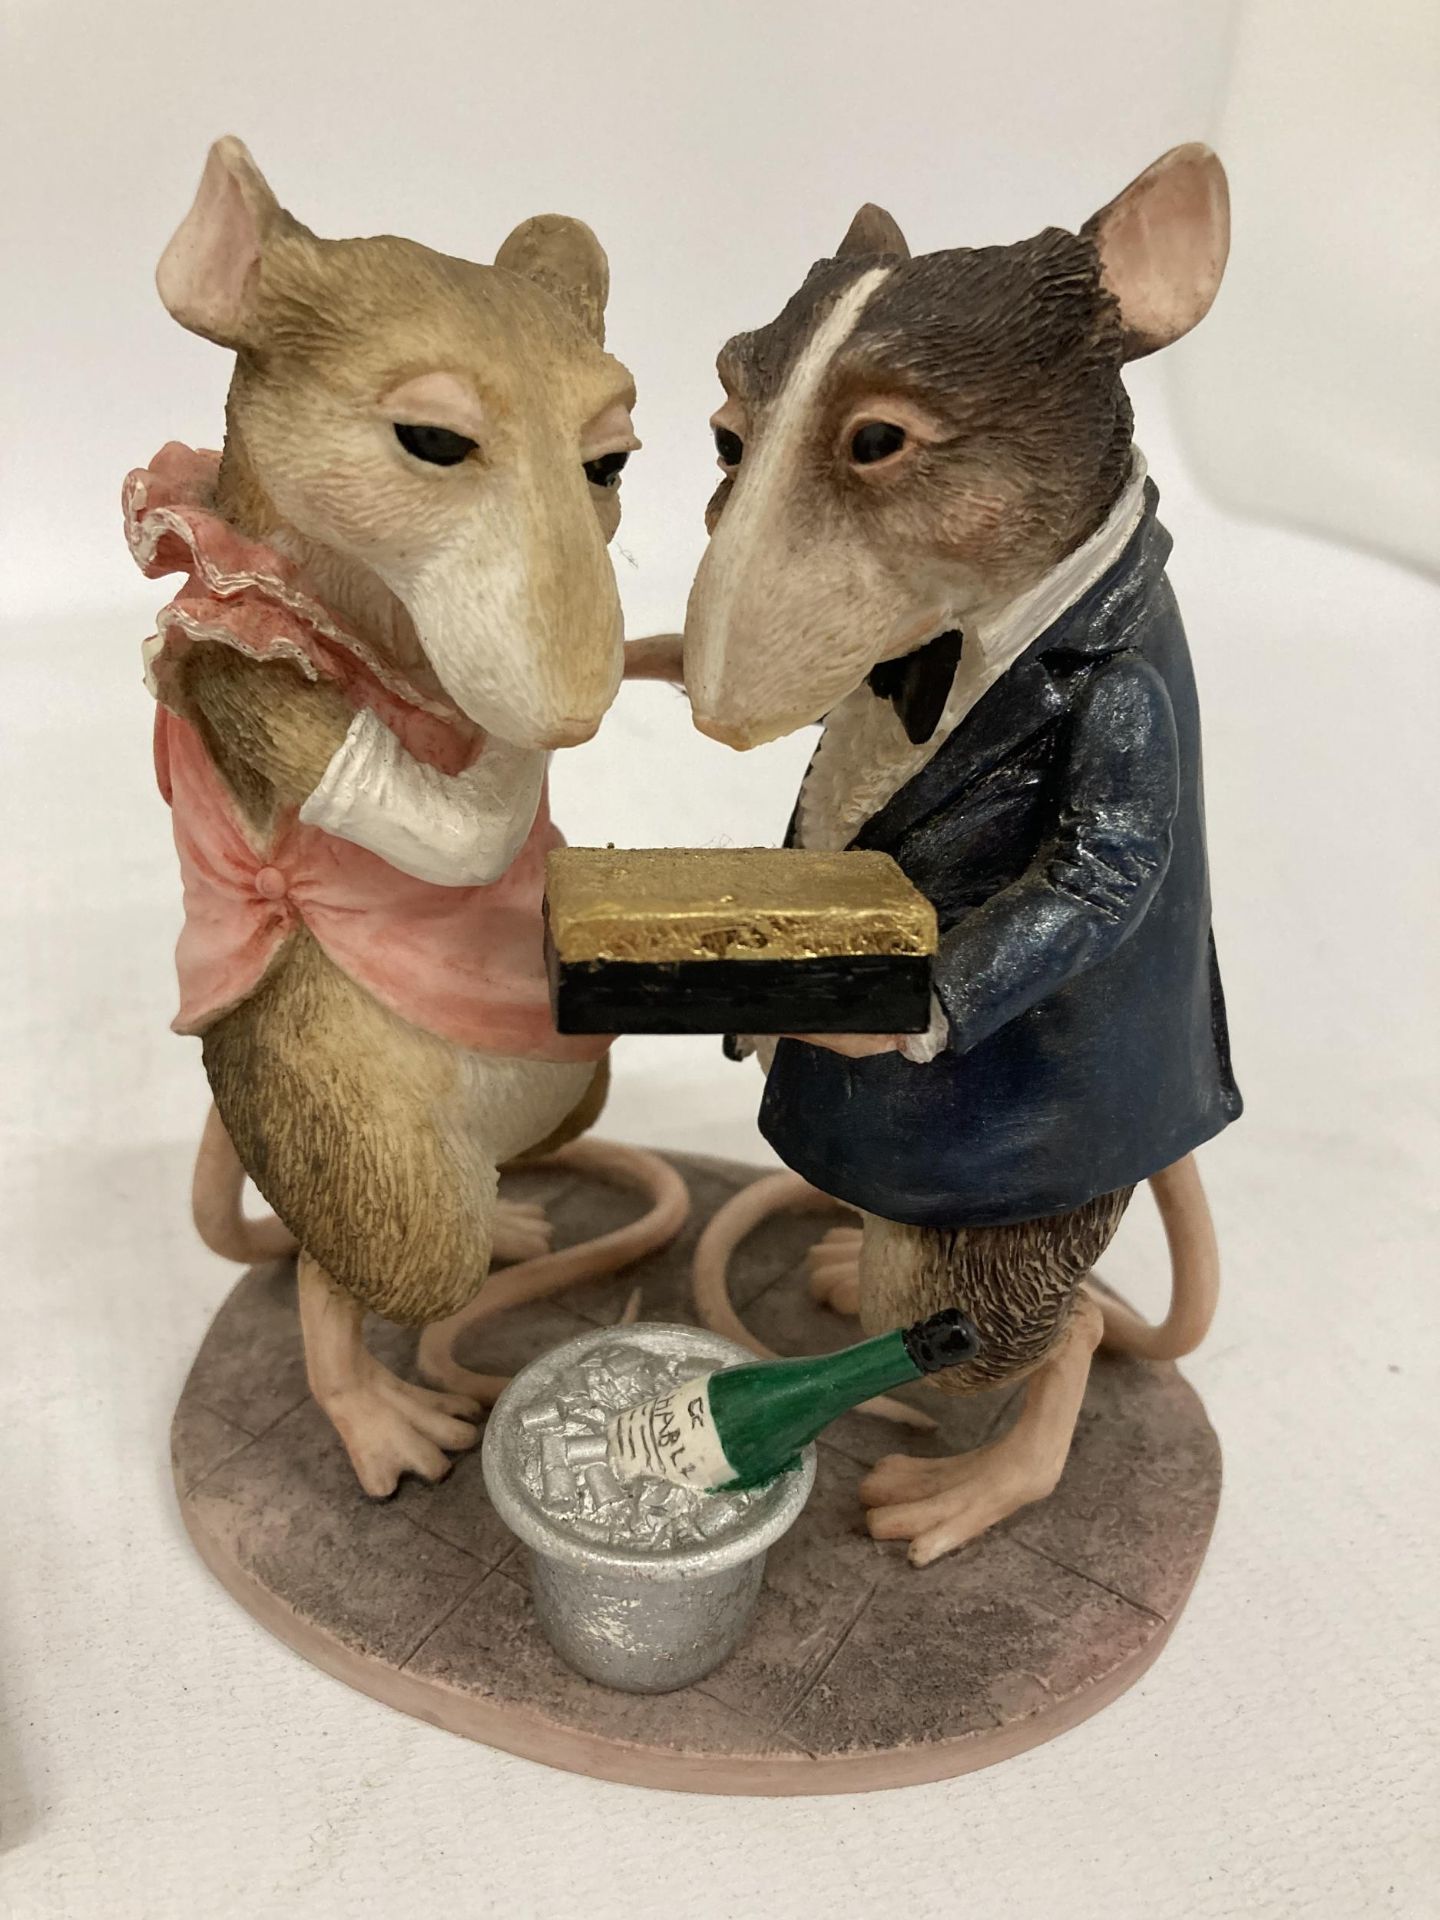 TWO BORDER FINE ARTS RAT FIGURES 'CONGRATULATIONS' AND 'SEWER RAT' - Image 3 of 4